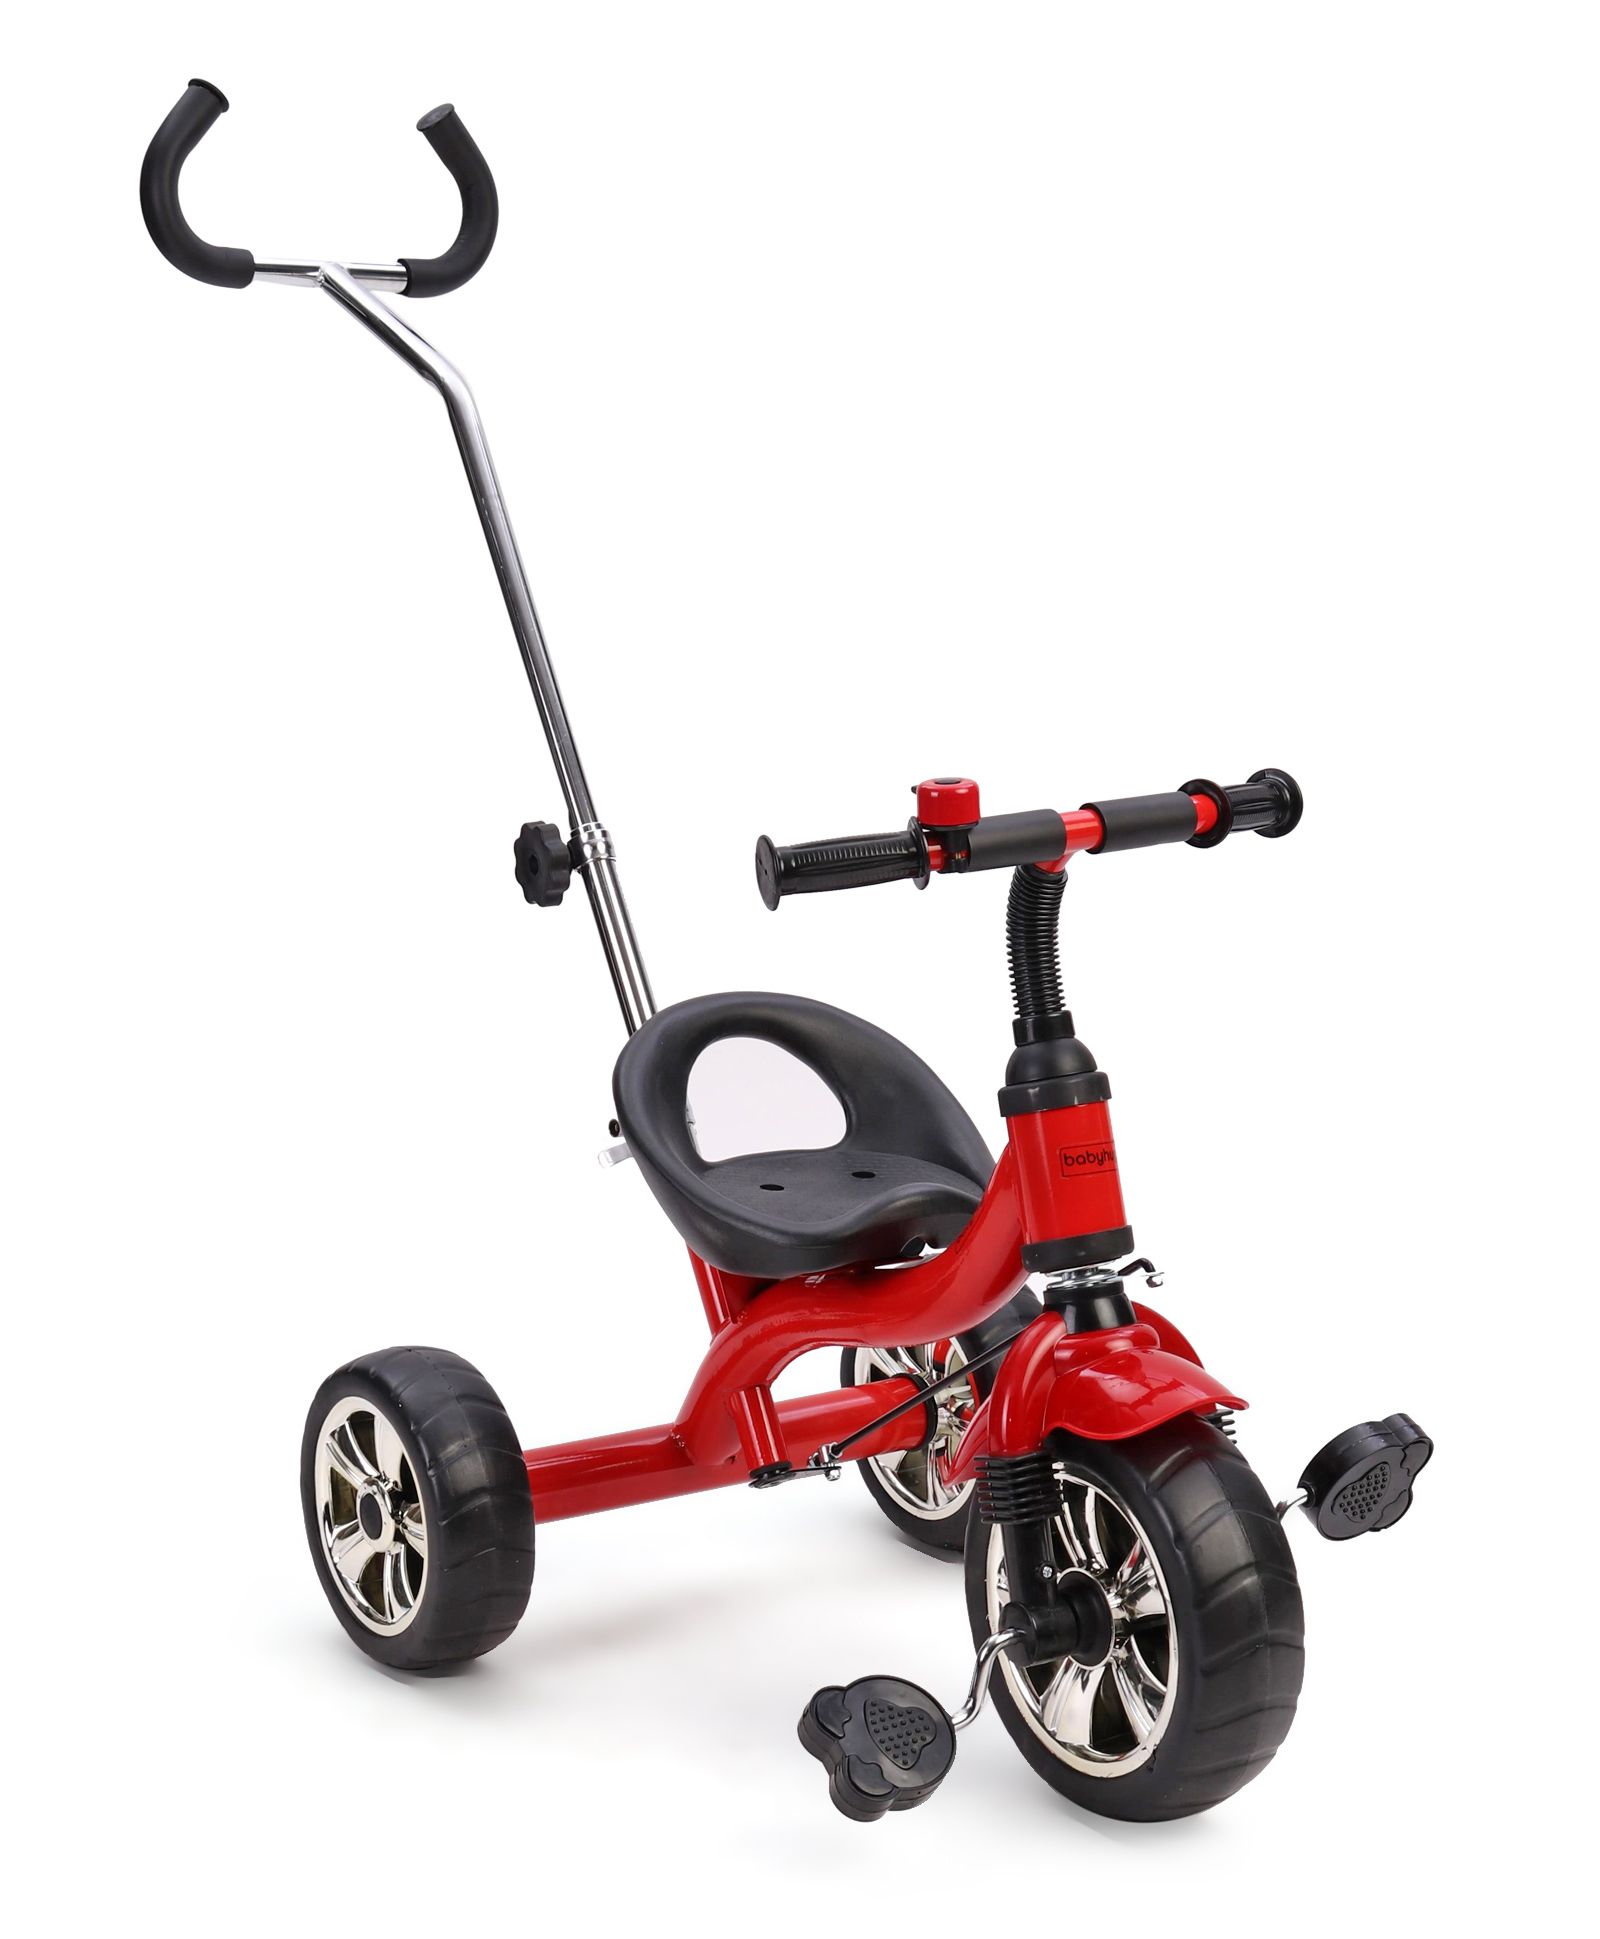 tricycle with handle to push